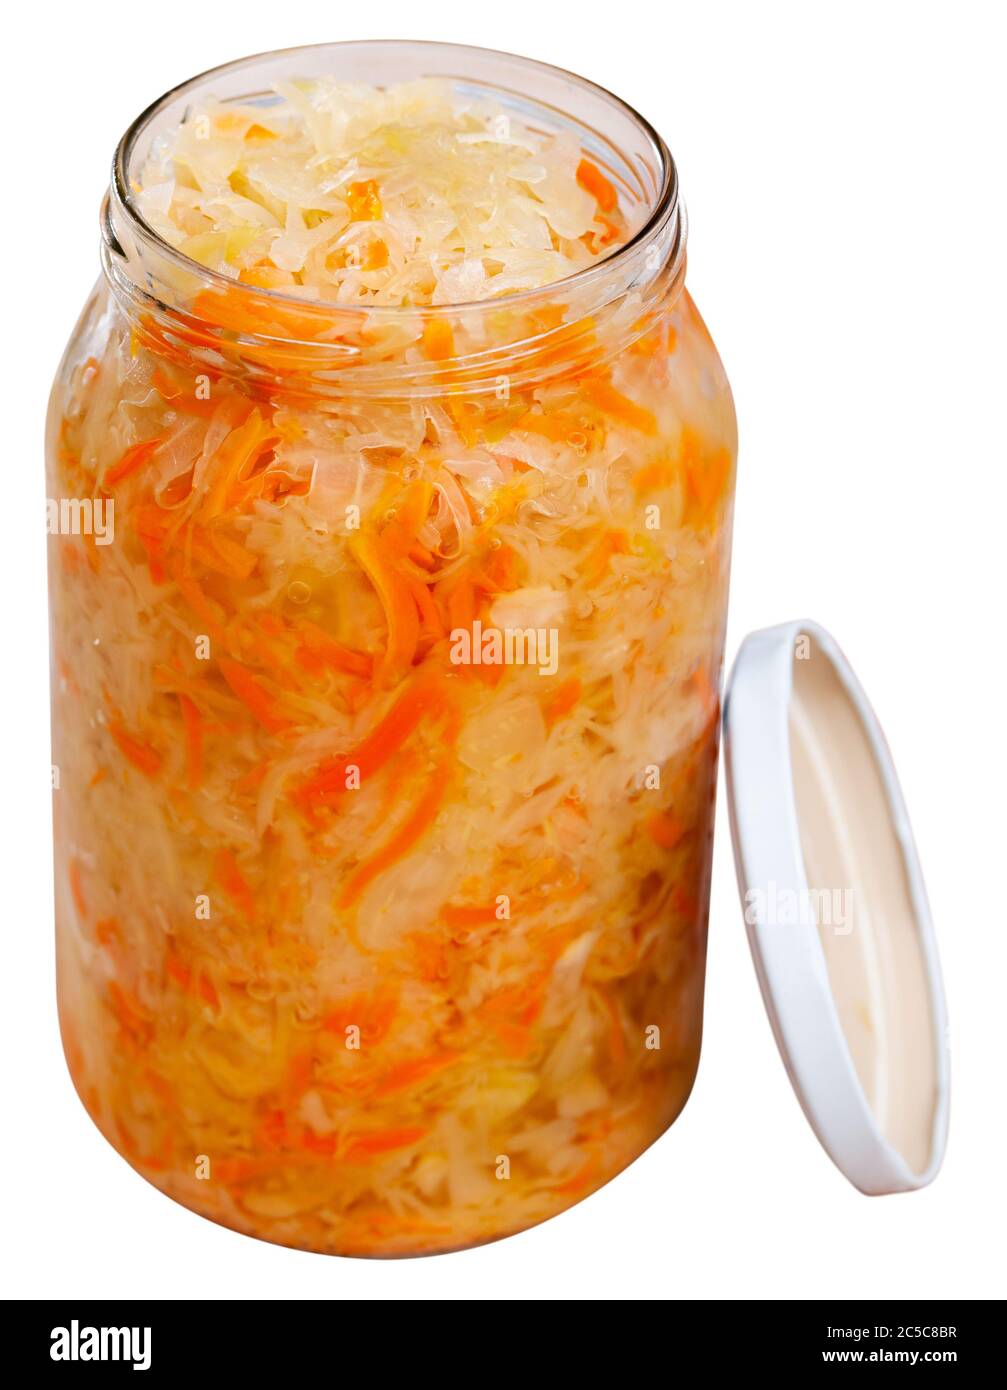 Homemade sauerkraut in glass preserving jar, fermented food. Isolated over white background Stock Photo